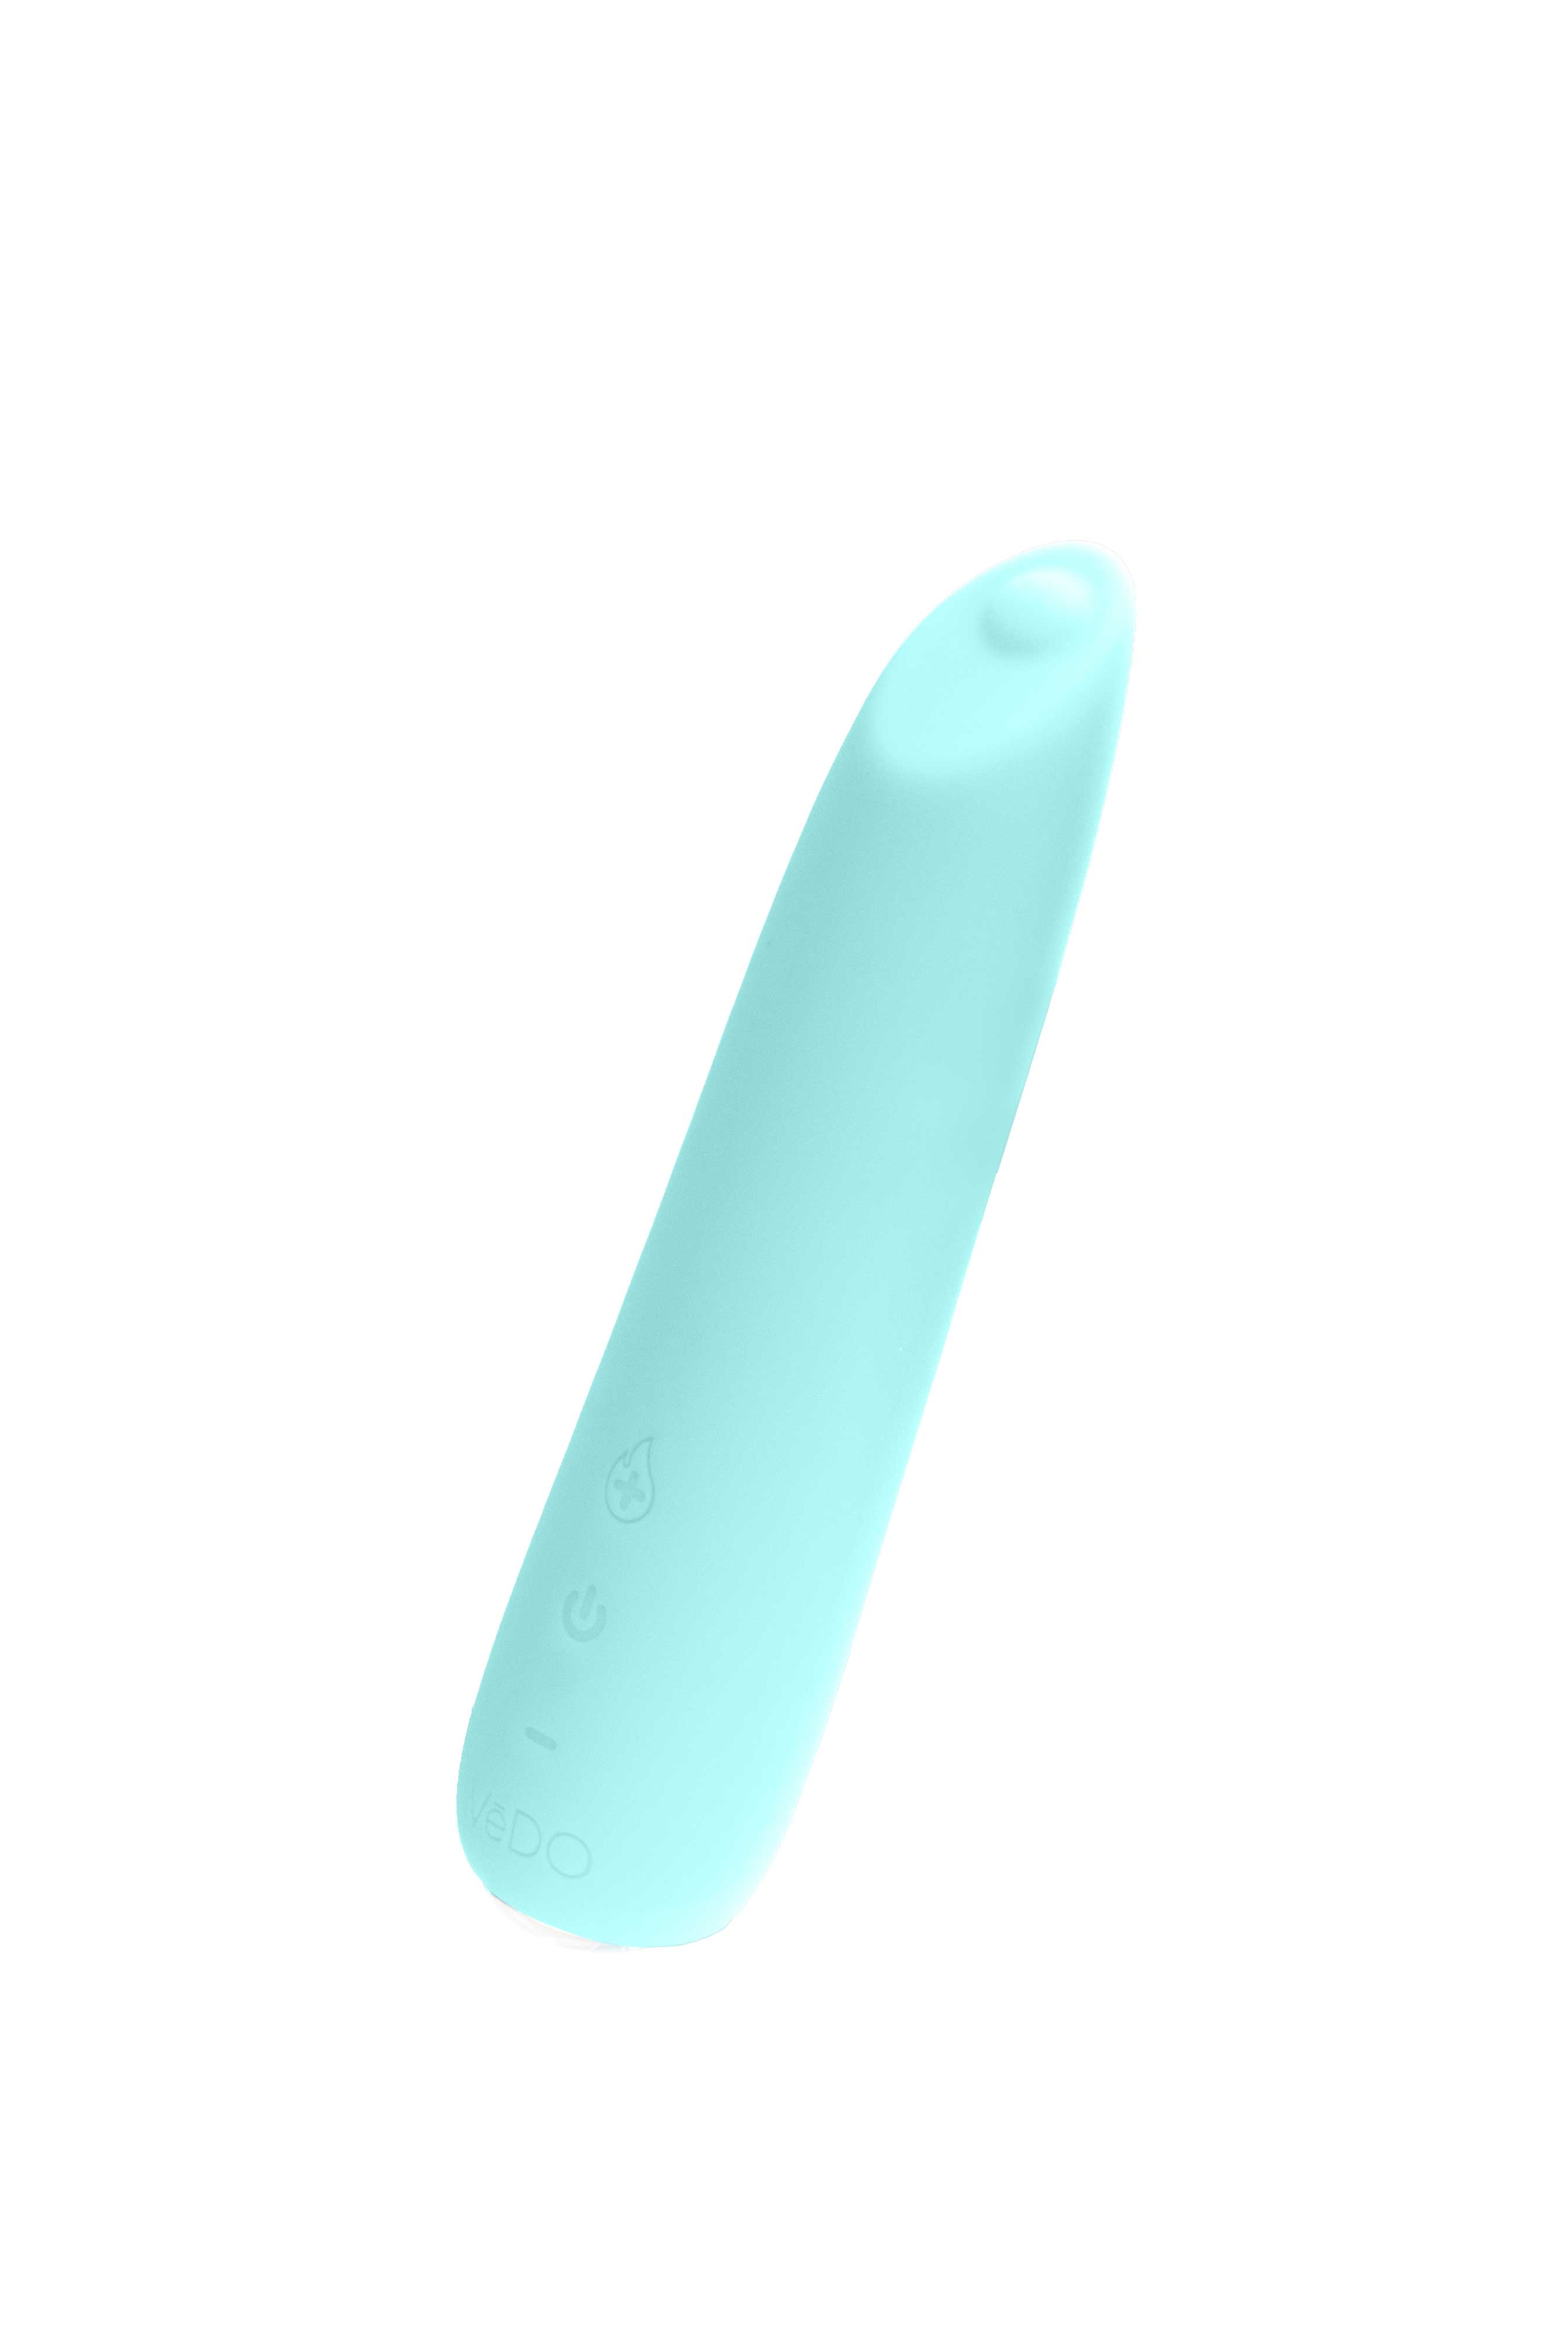 VeDO Boom Rechargeable Warming Vibe - Tease Me Turquoise